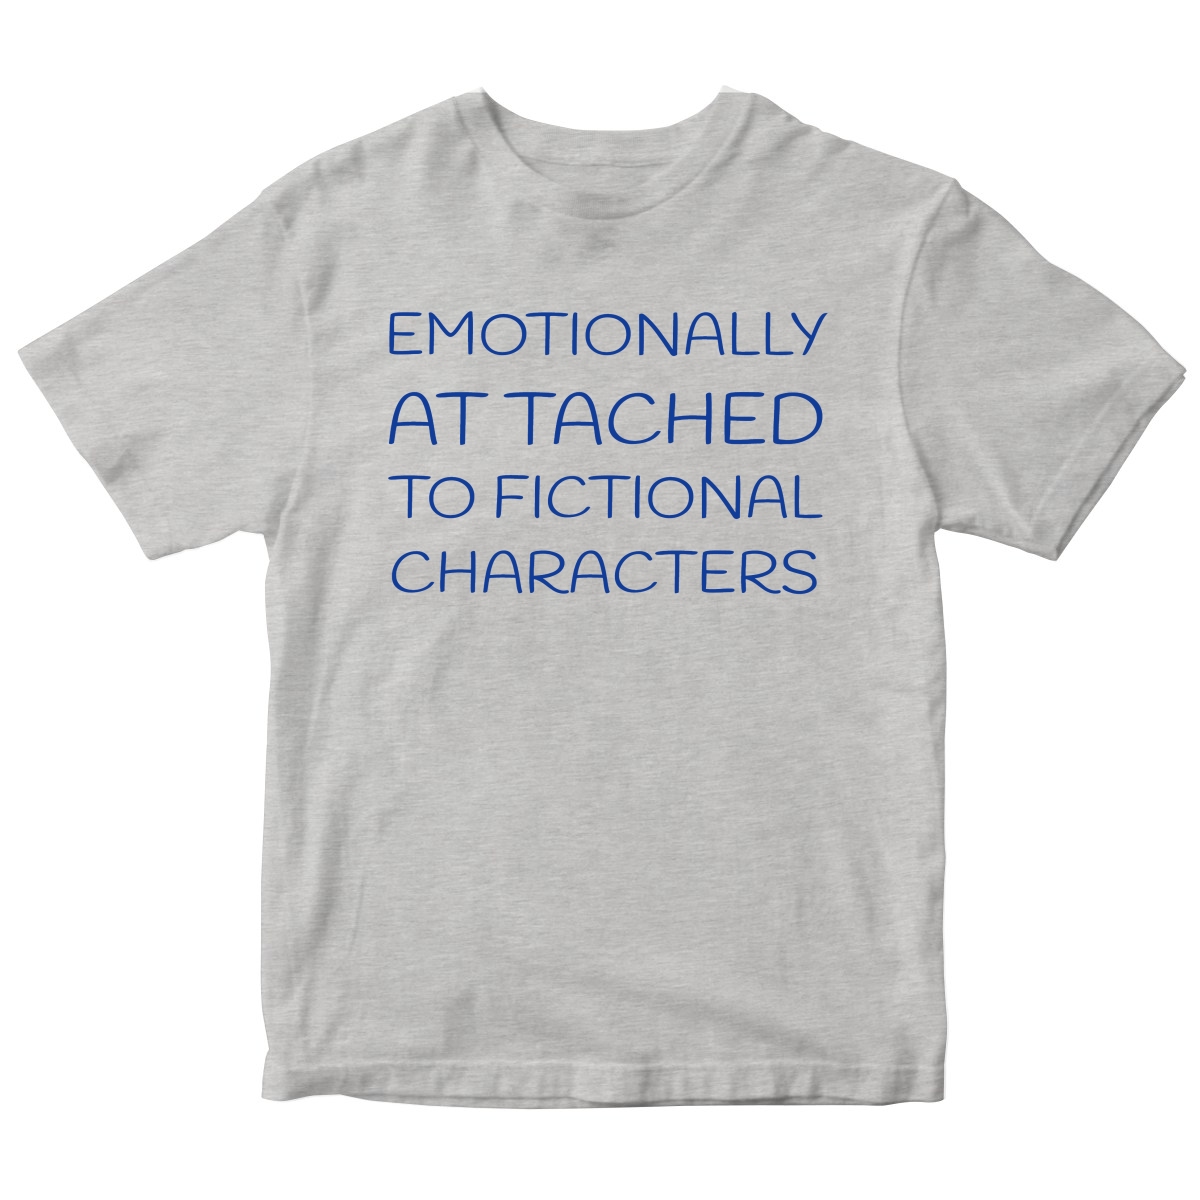 Emotionally Attached to Fictional Characters Kids T-shirt | Gray